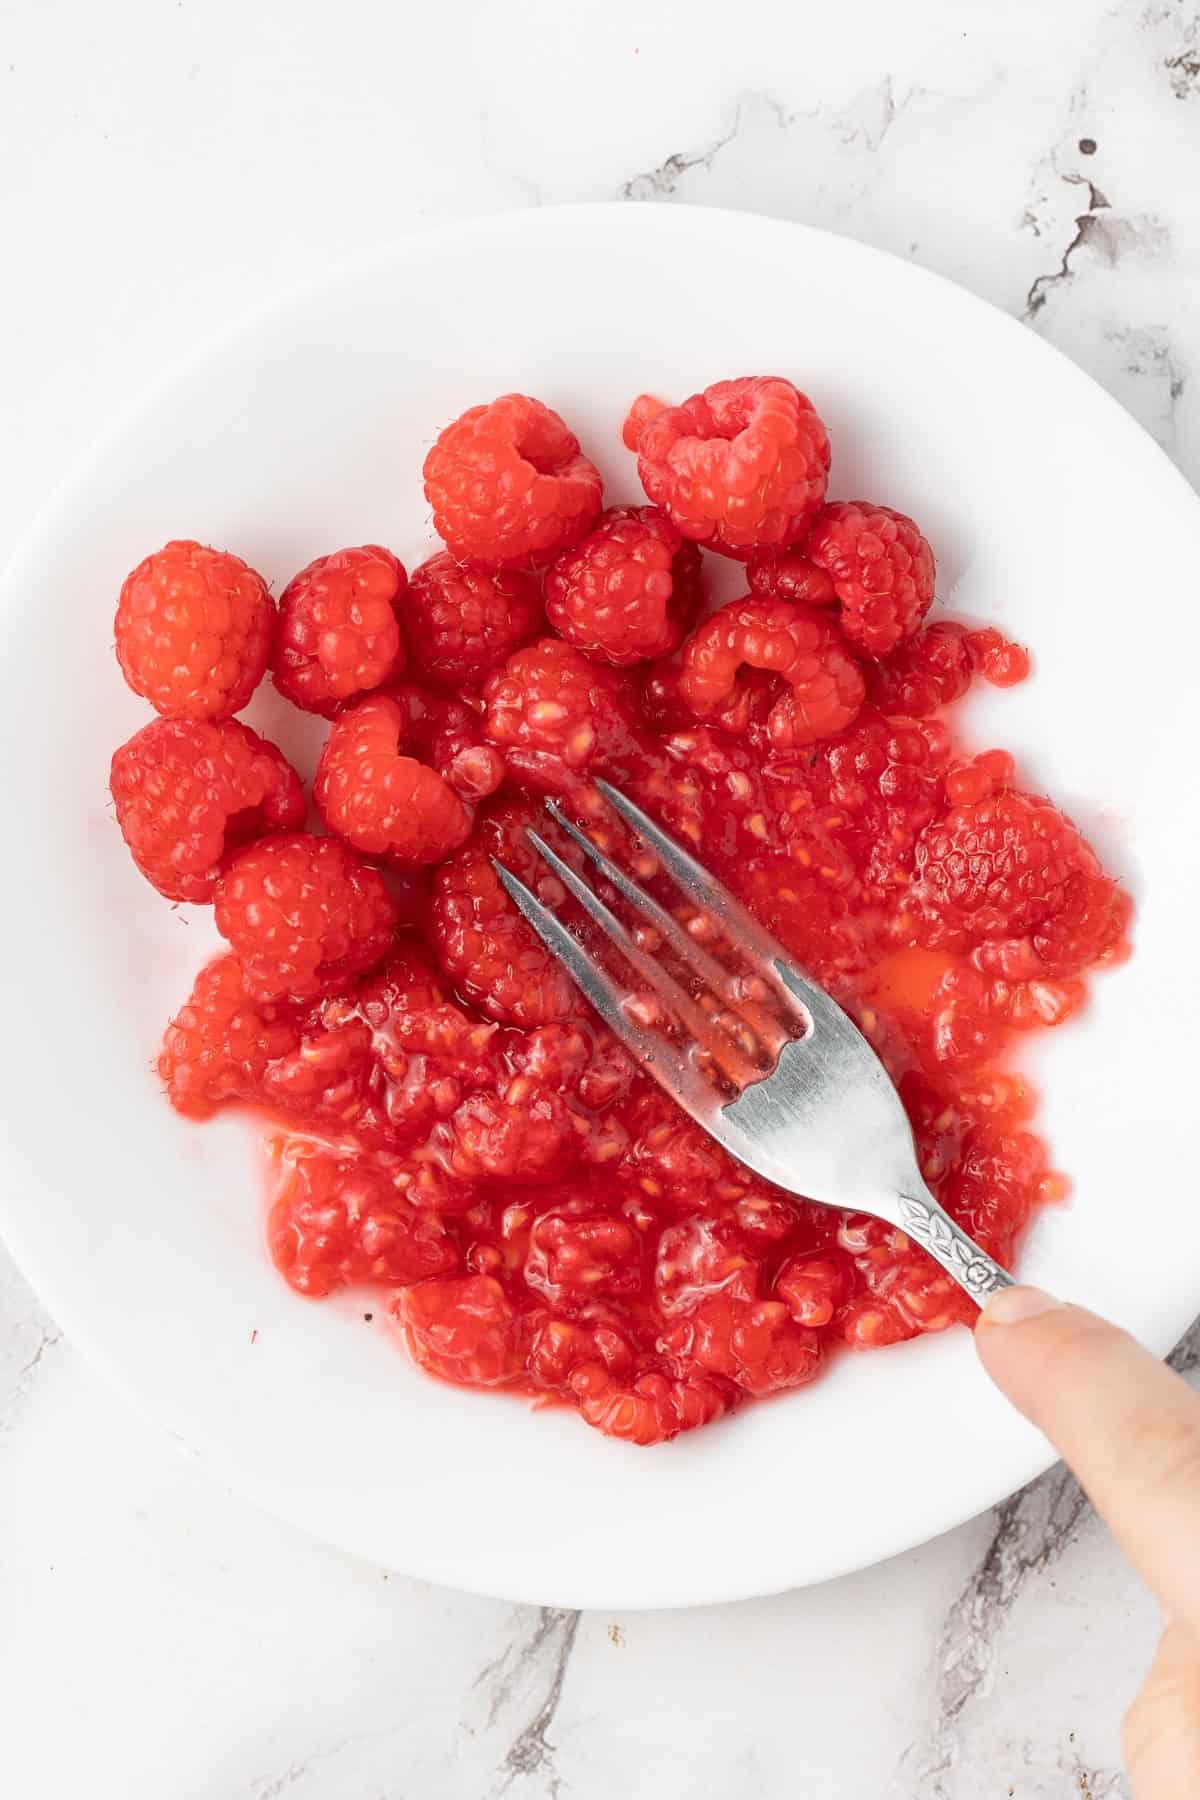 Round white dish with raspberries being mashed with a fork.